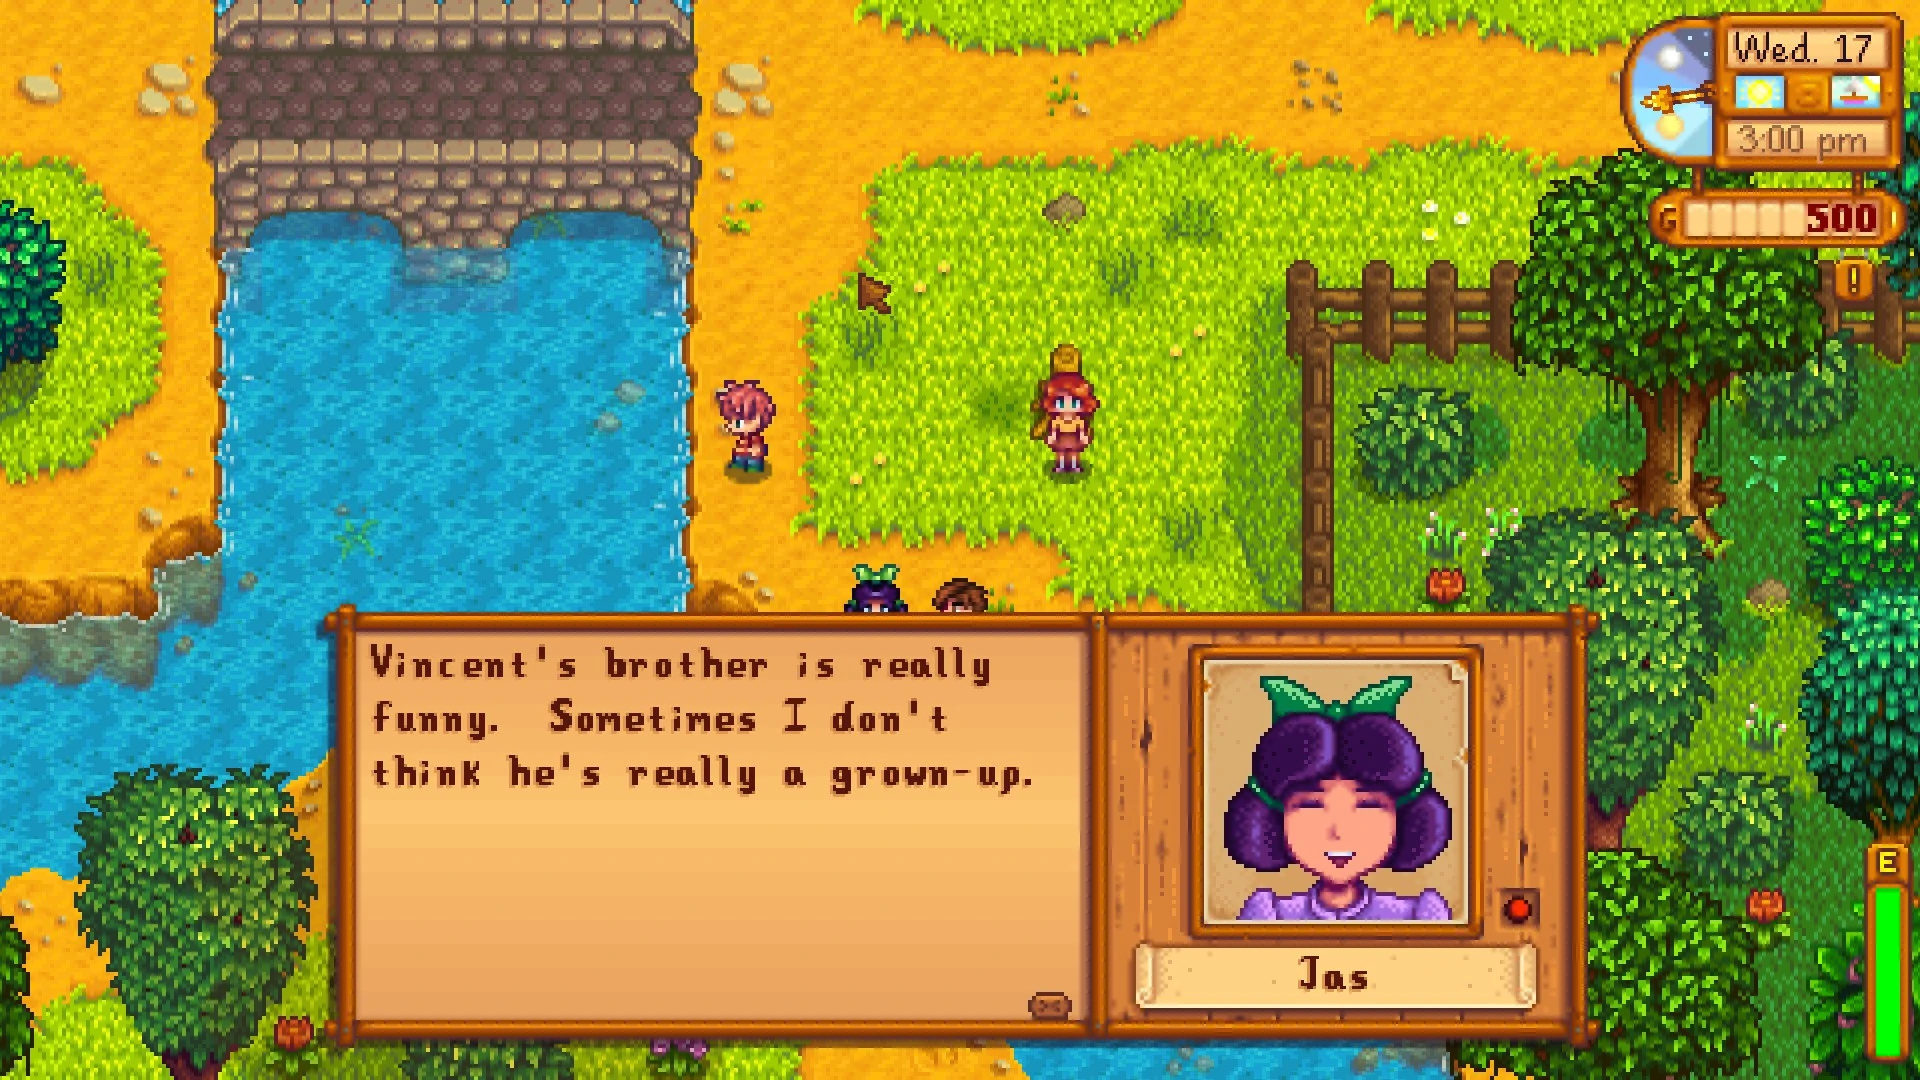 More Personality for Jas at Stardew Valley Nexus - Mods and community.